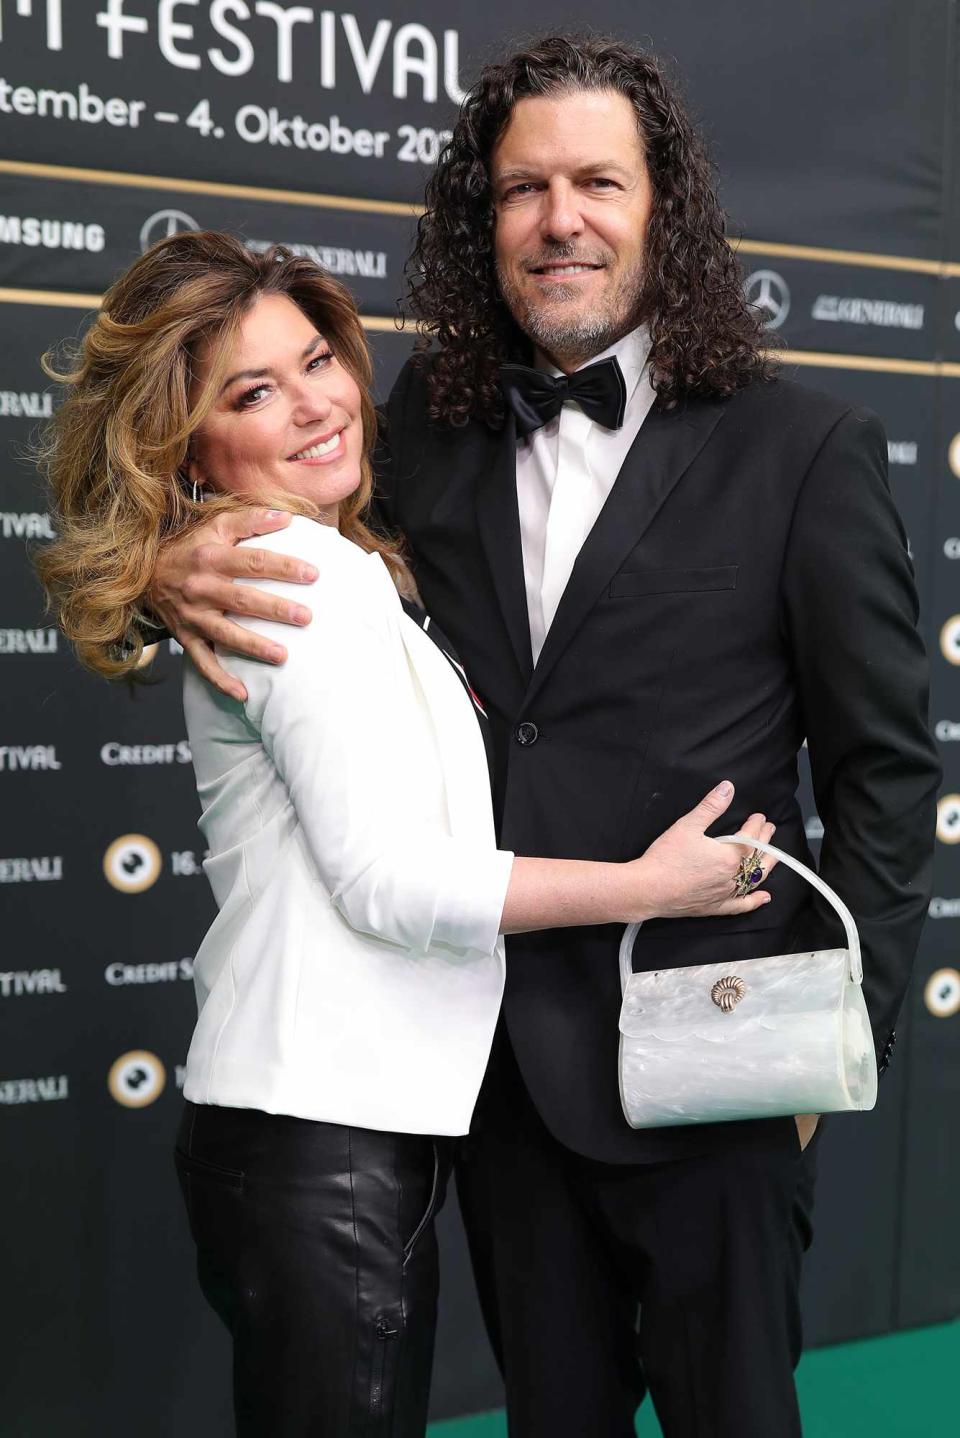 Shania Twain and her husband Frederic Thiebaud attend the "Who you gonna call" photocall during the 16th Zurich Film Festival at Kino Corso on September 26, 2020 in Zurich, Switzerland